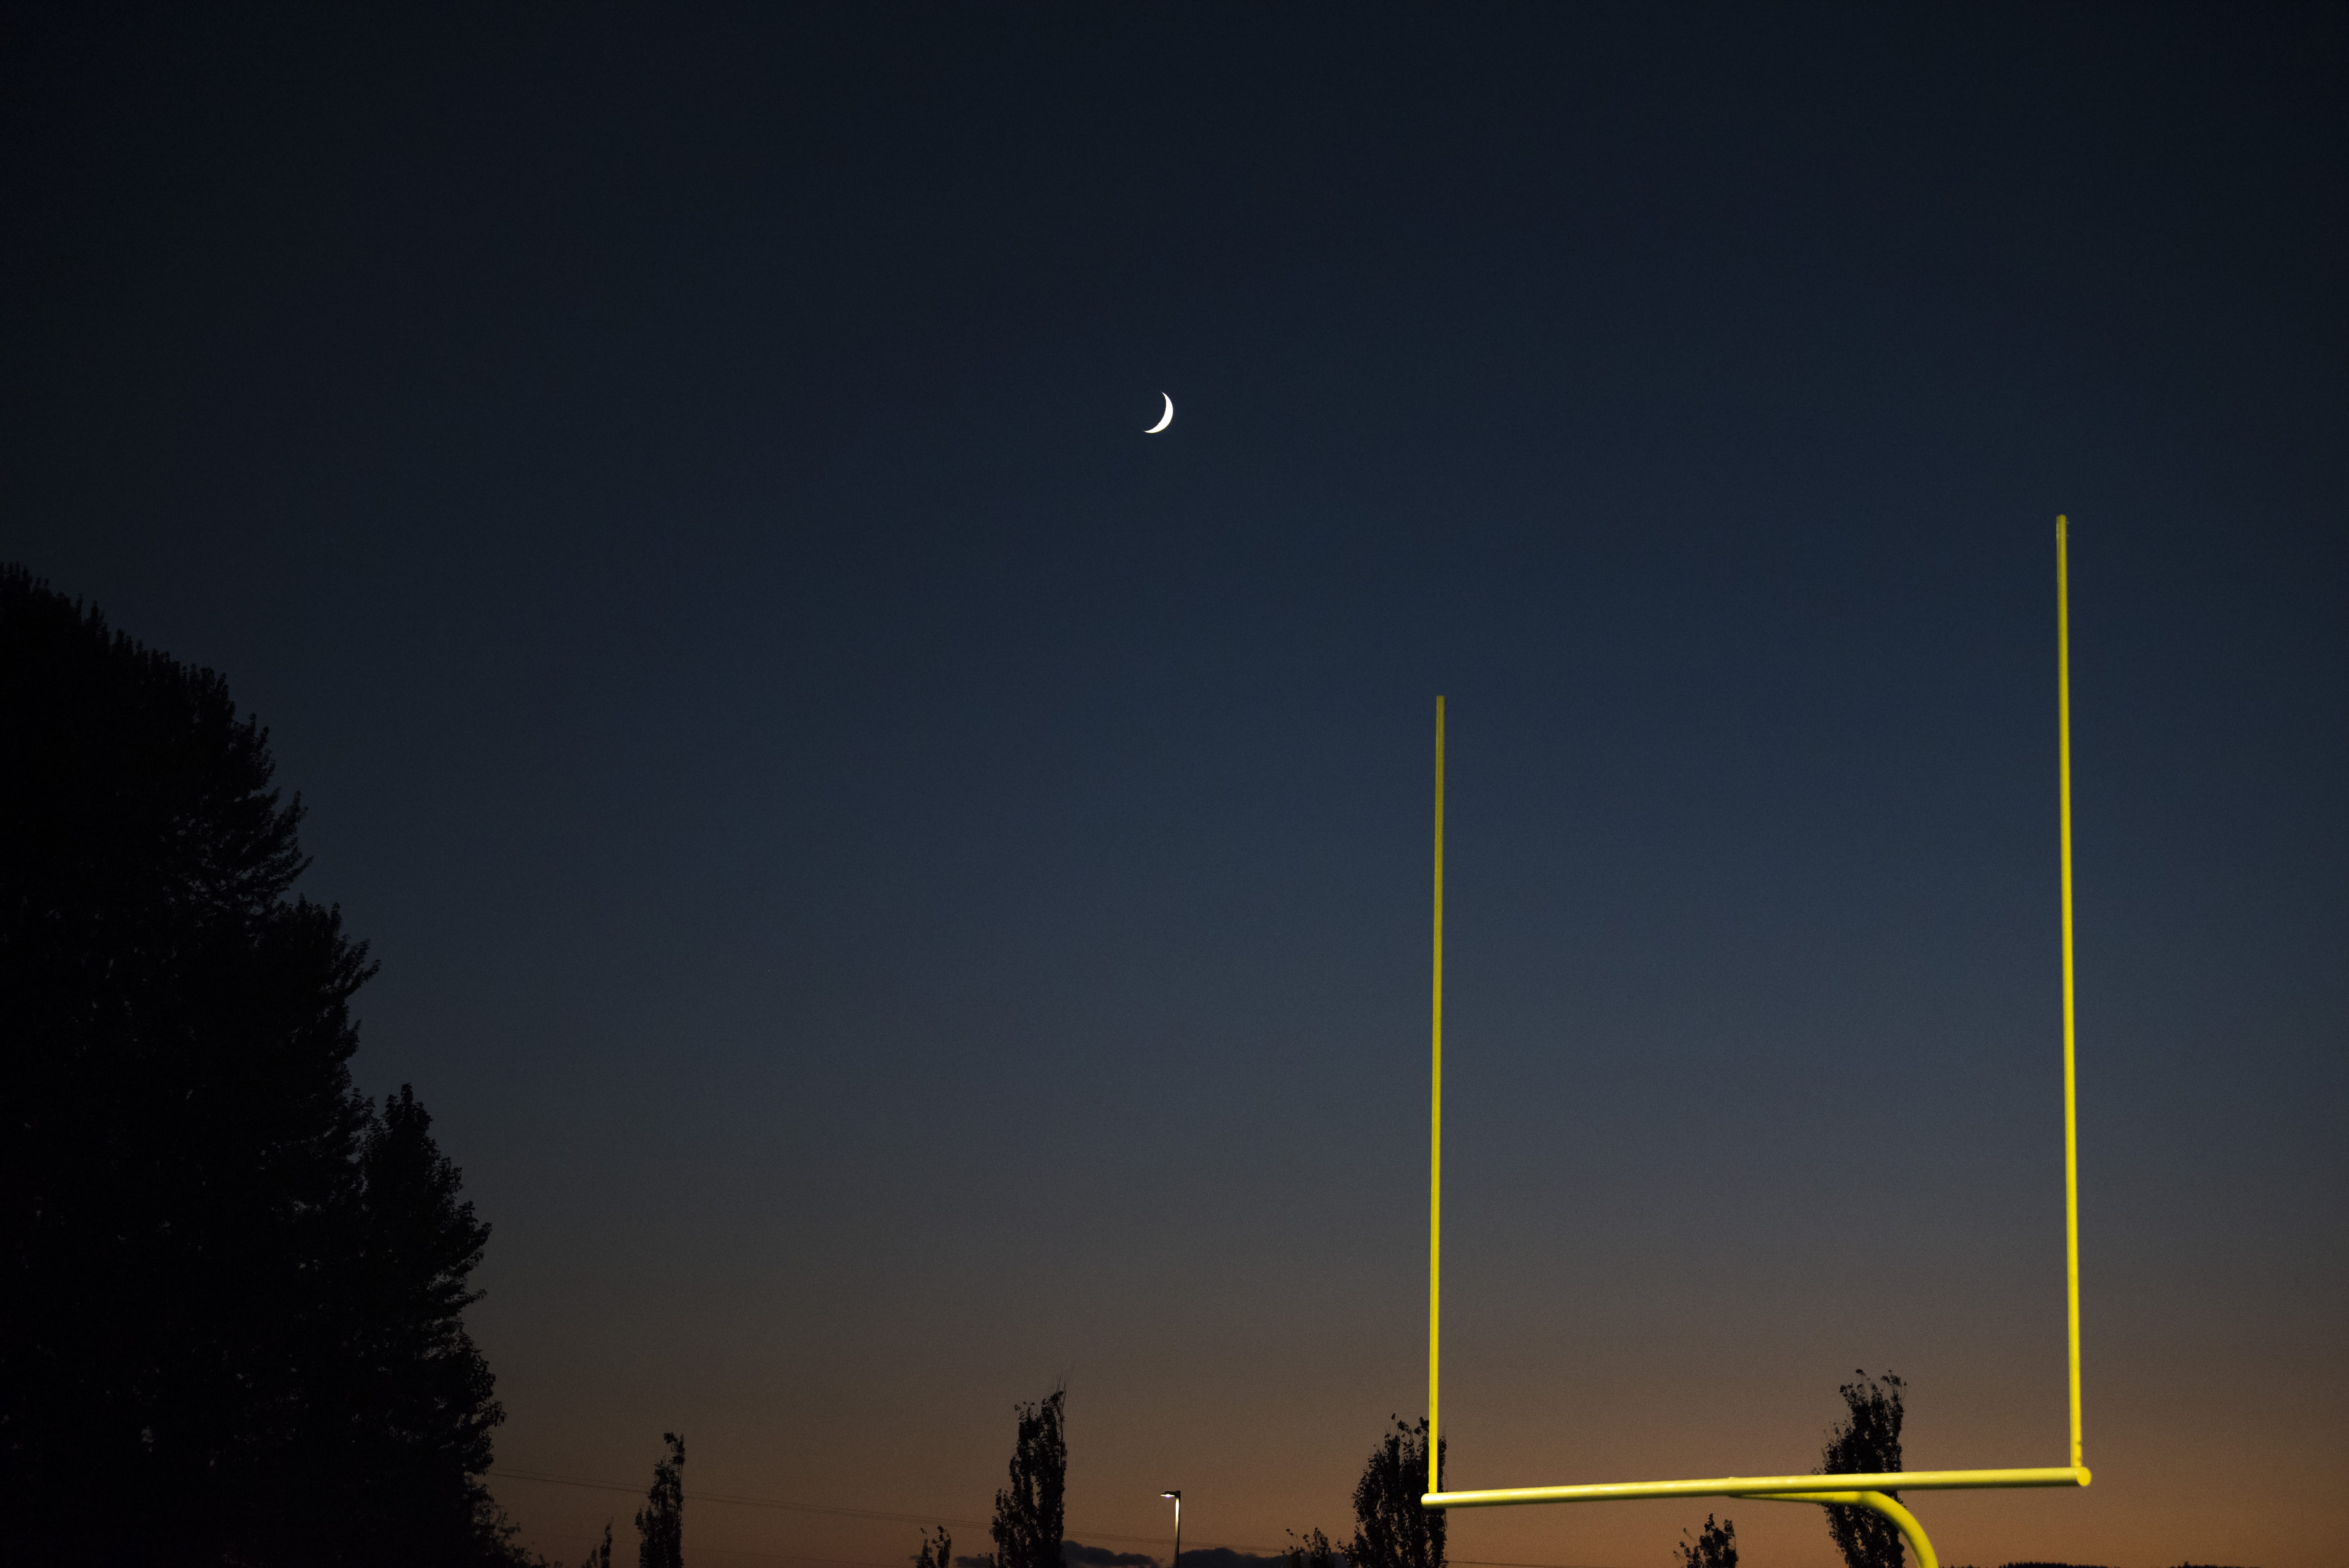 The moon rises over the Woodland, Ridgefield game at Woodland High School on Friday night, Oct. 12, 2018.